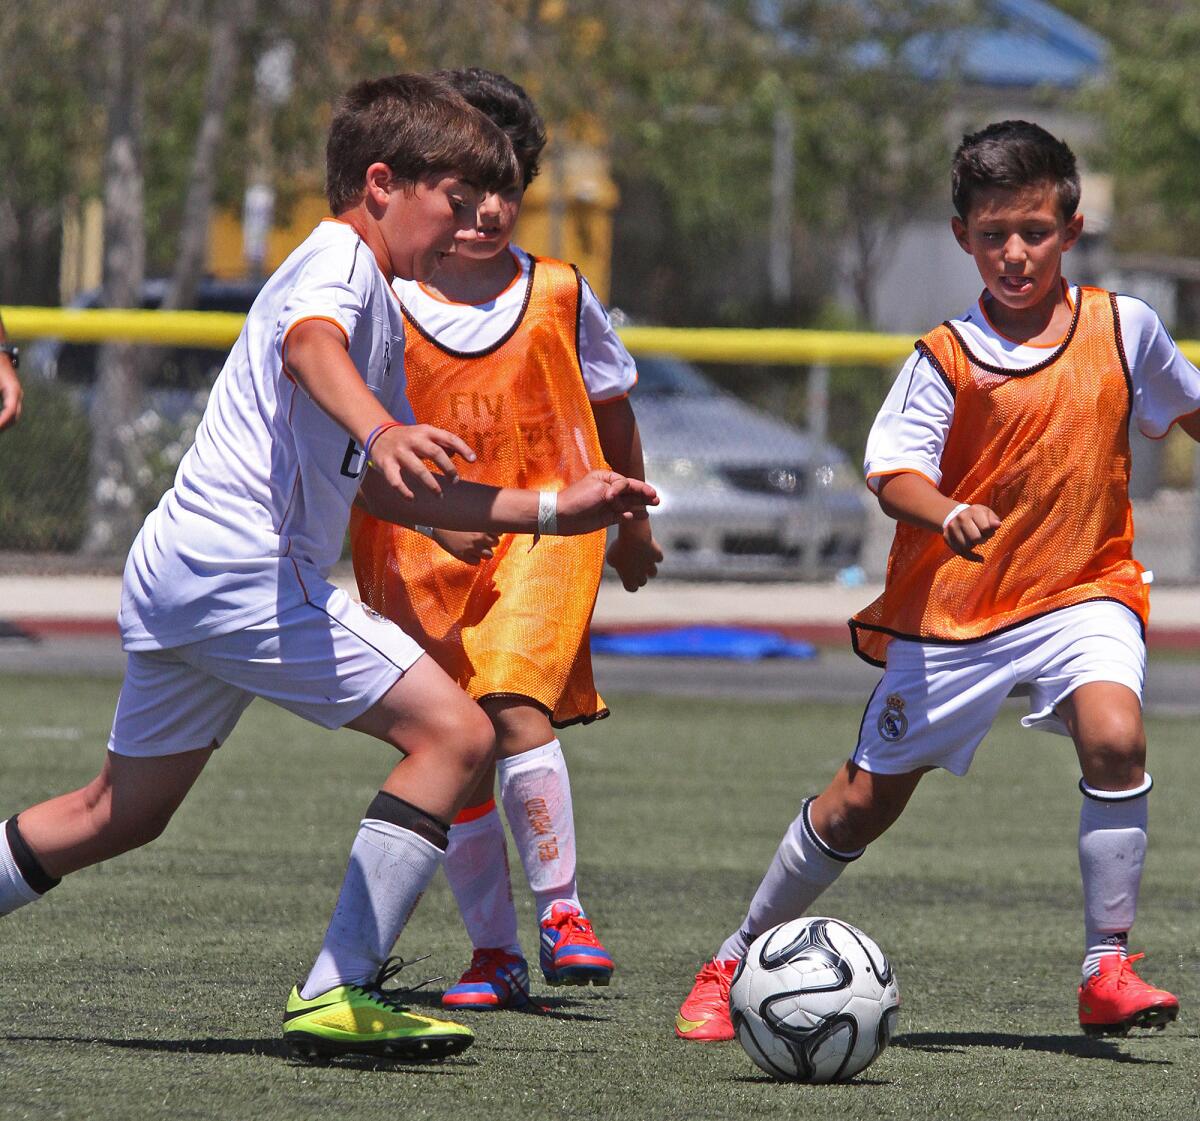 Campers run with the ball at The Real Madrid Foundation Campus Experience Soccer camps during a scrimmage with Team Casillas, the youngest soccer campers at the Glendale Sports Complex on Tuesday, July 22, 2014. These camps, for soccer players from 7-17, are new and starting out in Southern California, the first of which at the Glendale Sports Complex.